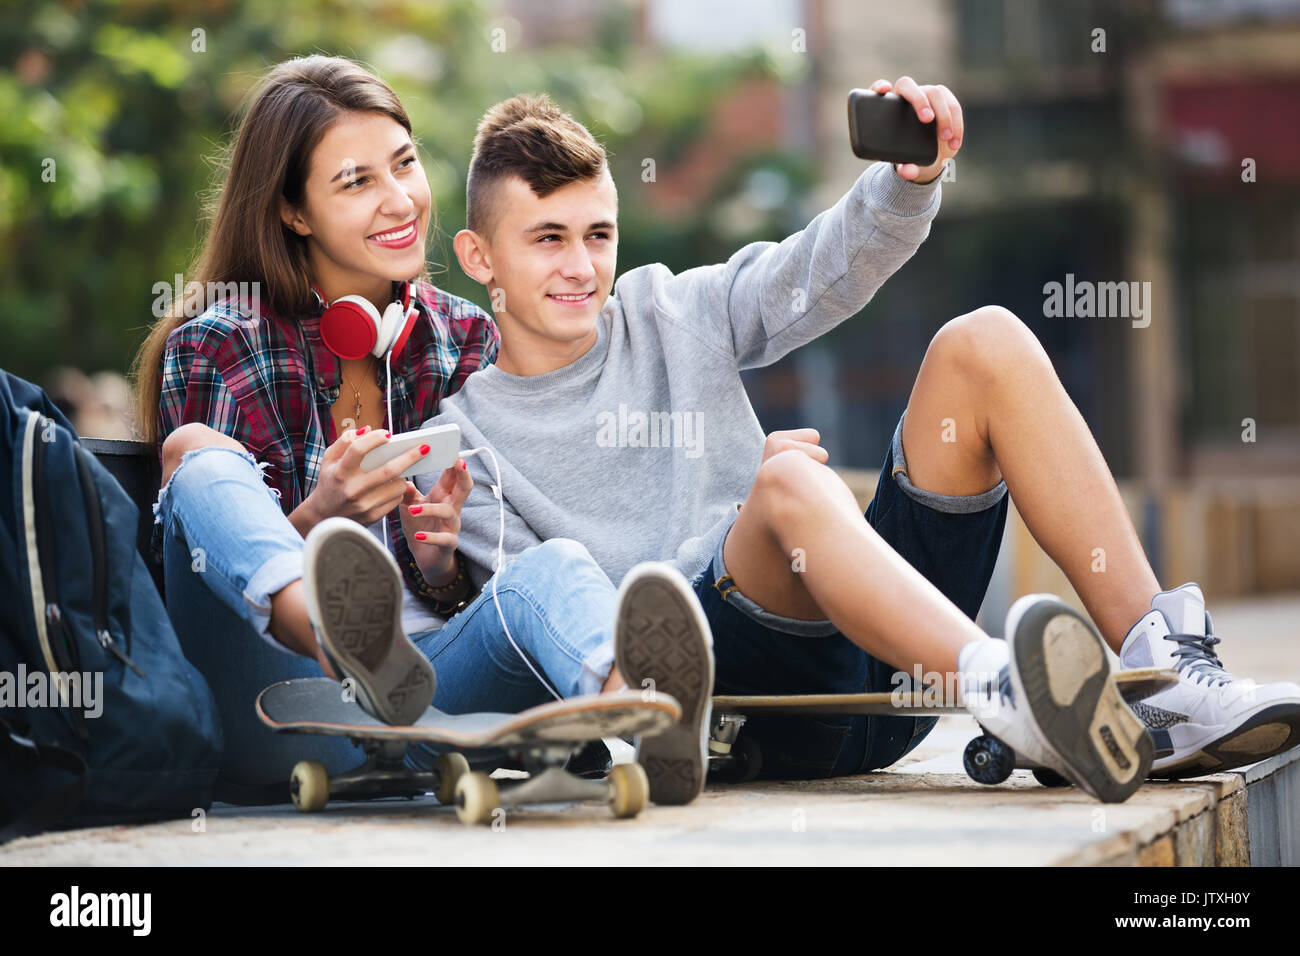 Smiling boy and girl teens posing at mobile phone for selfie Stock Photo